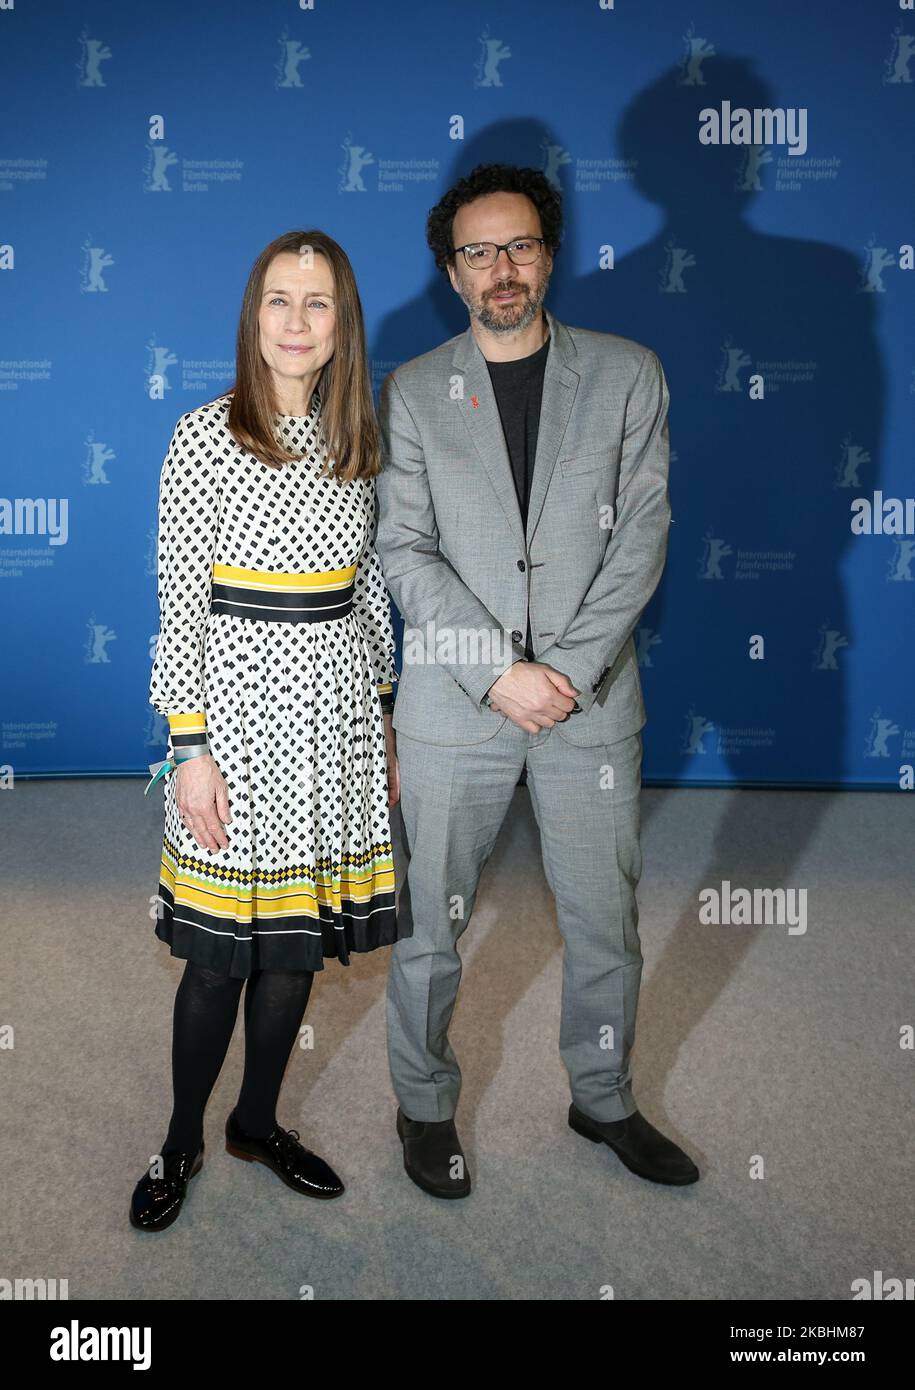 Executive Director of Berlinale Mariette Rissenbeek and Artistic Director of Berlinale Carlo Chatrian pose at the photo call during the 70th Berlinale International Film Festival Berlin at Grand Hyatt Hotel on February 23, 2020 in Berlin, Germany (Photo by Dominika Zarzycka/NurPhoto) Stock Photo